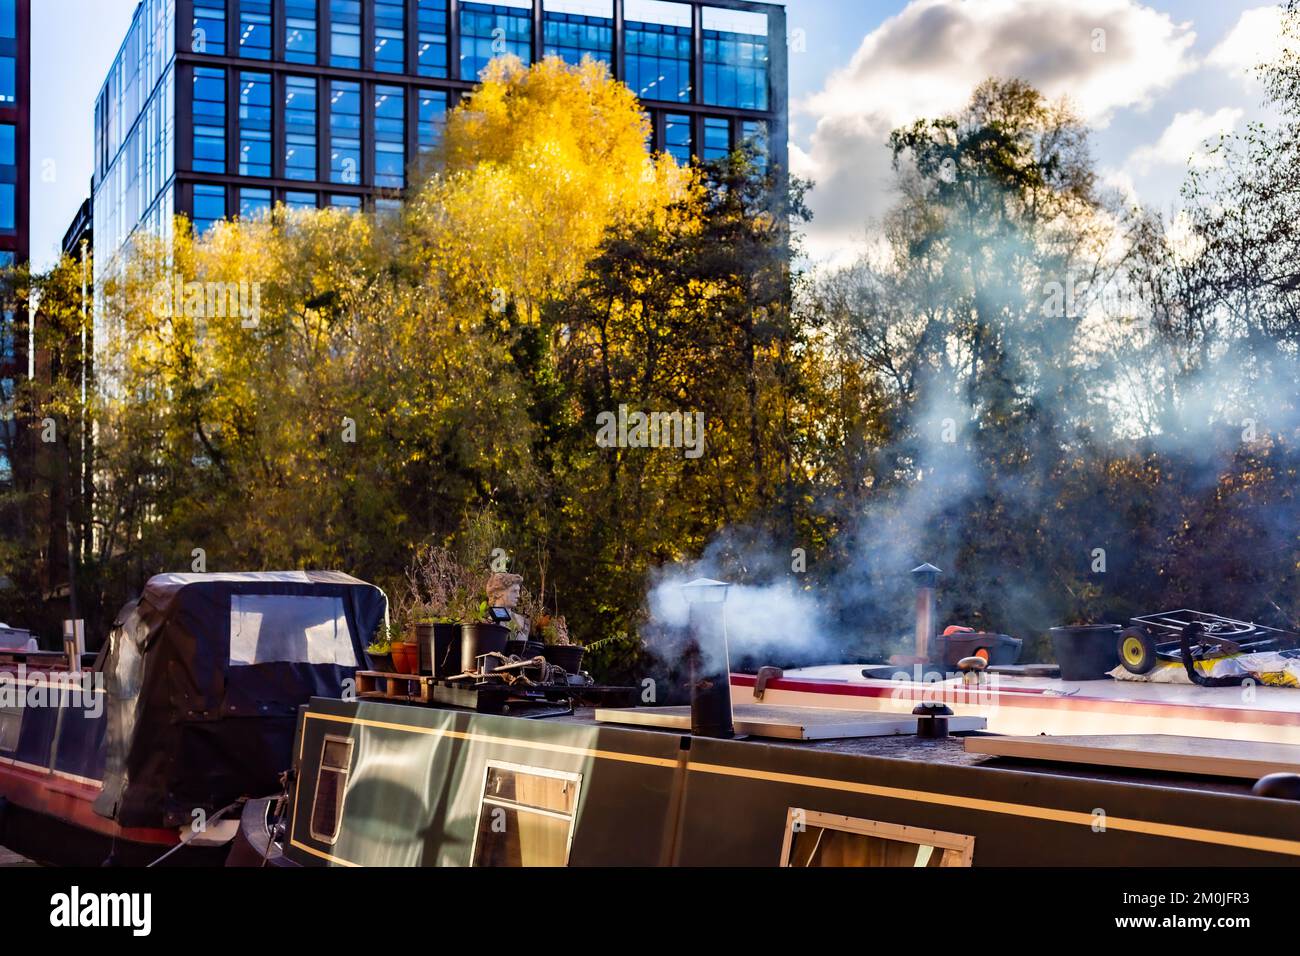 Canal boats moored on the Canal at King's Cross.Two canal boats photographed with strong side lighting.One boat has their chimney funnel smoking . Stock Photo